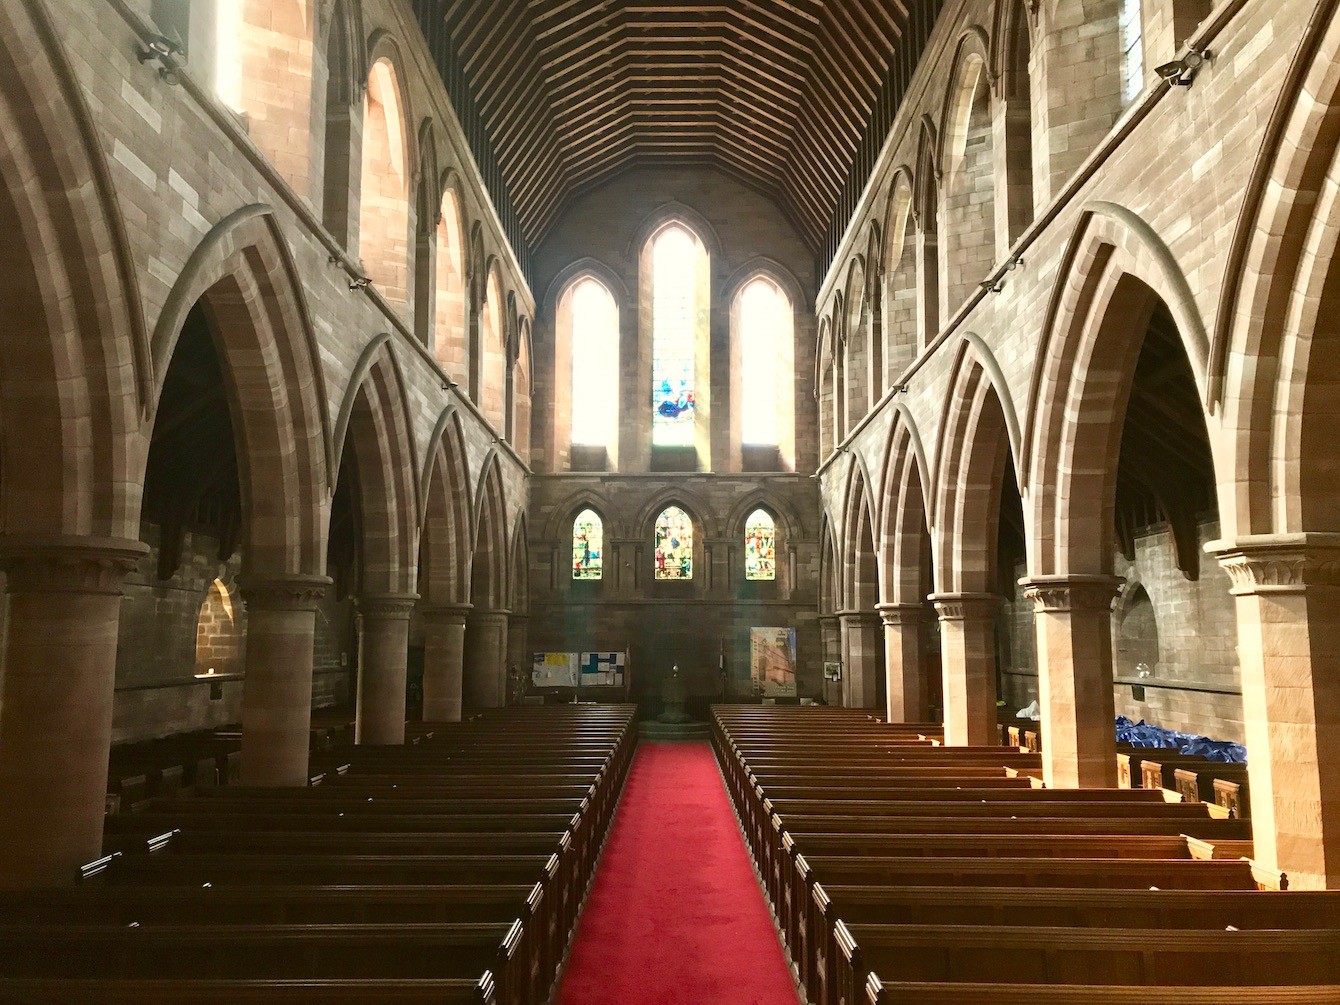 The inside of St. Chad's Church Kirkby looking westwards.